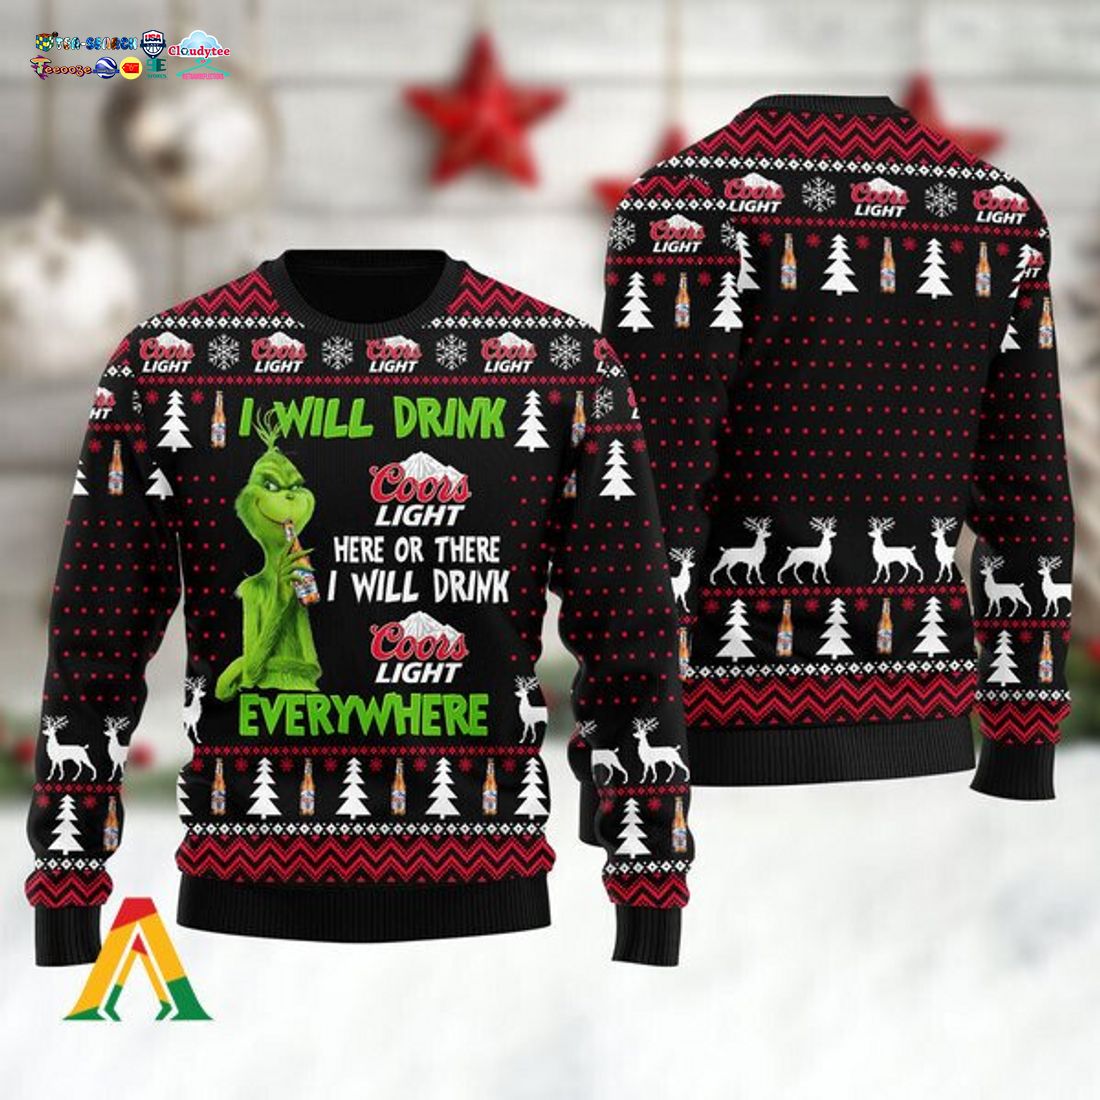 Grinch I Will Drink Coors Light Everywhere Ver 2 Ugly Christmas Sweater